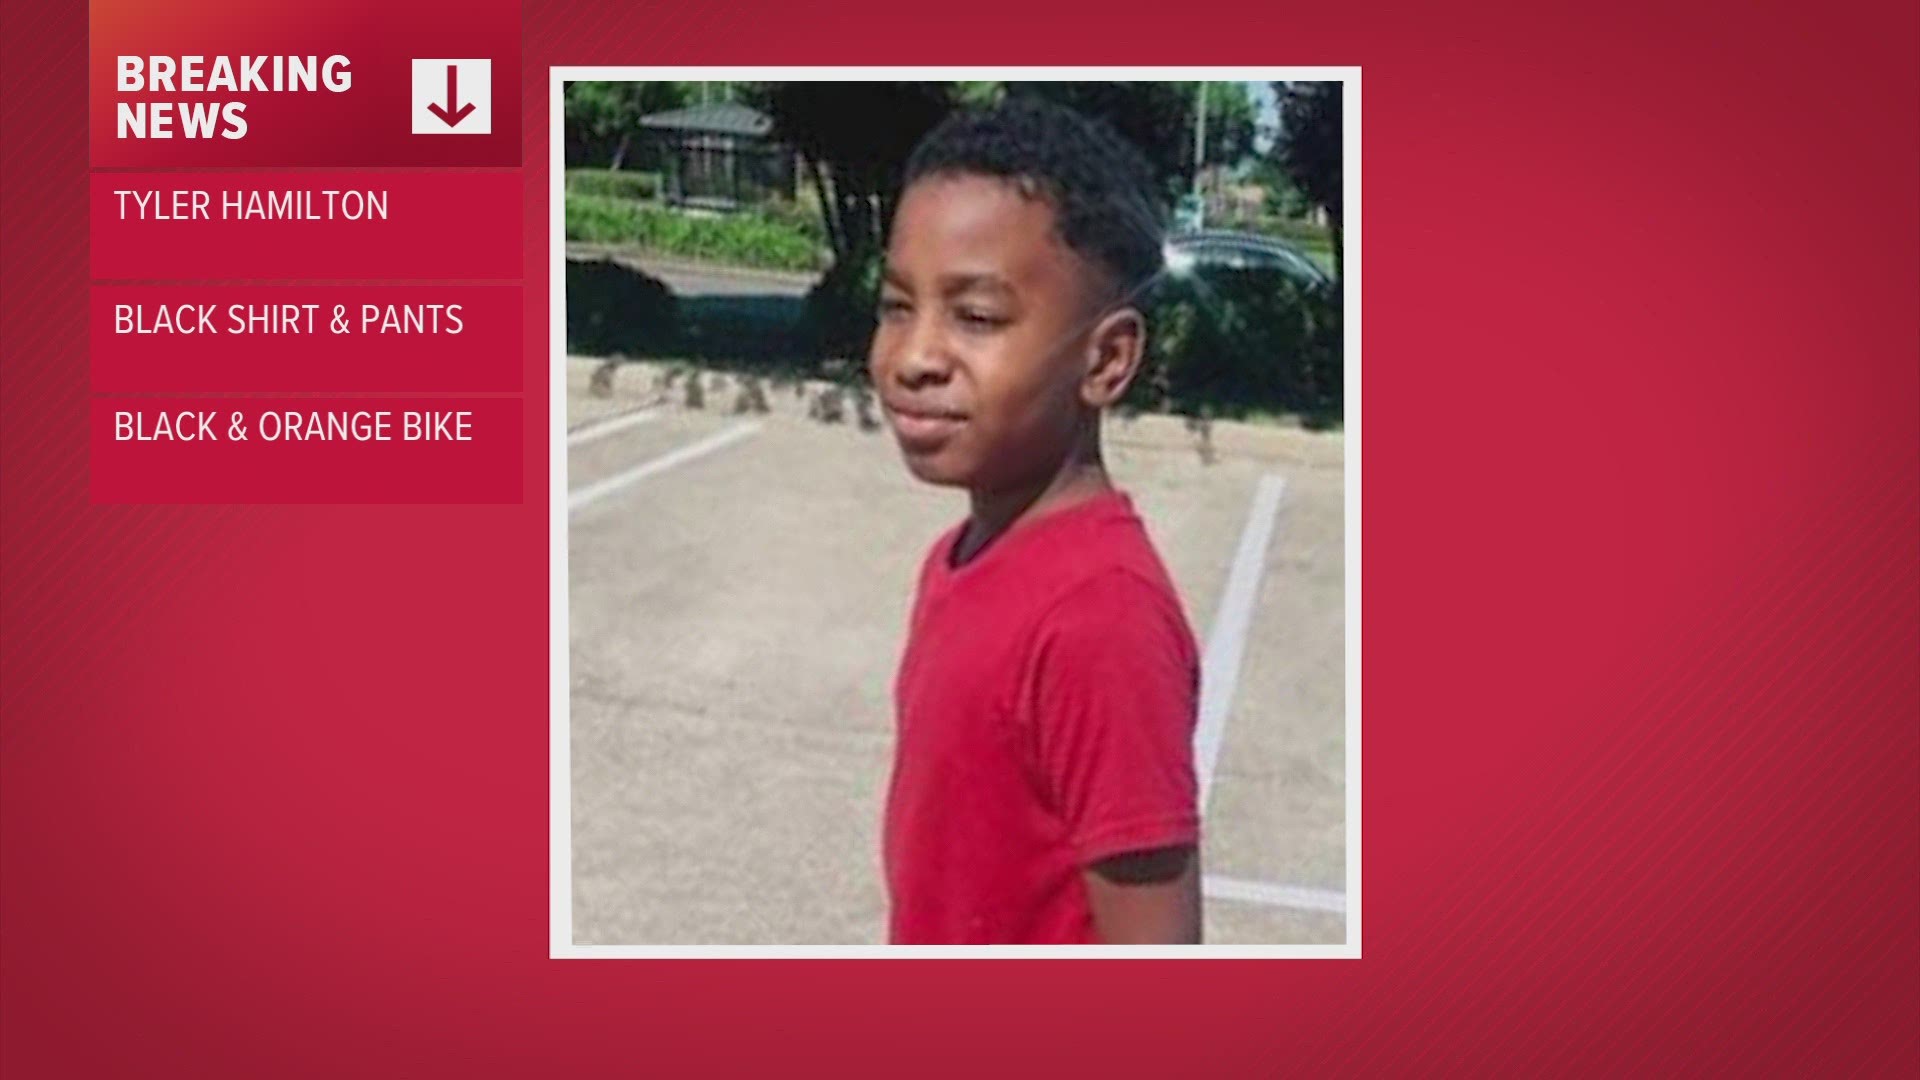 Houston police are looking for Tyler Hamilton, who they said was last seen near his residence on Briar Forest between Dairy Ashford and Eldridge Parkway.